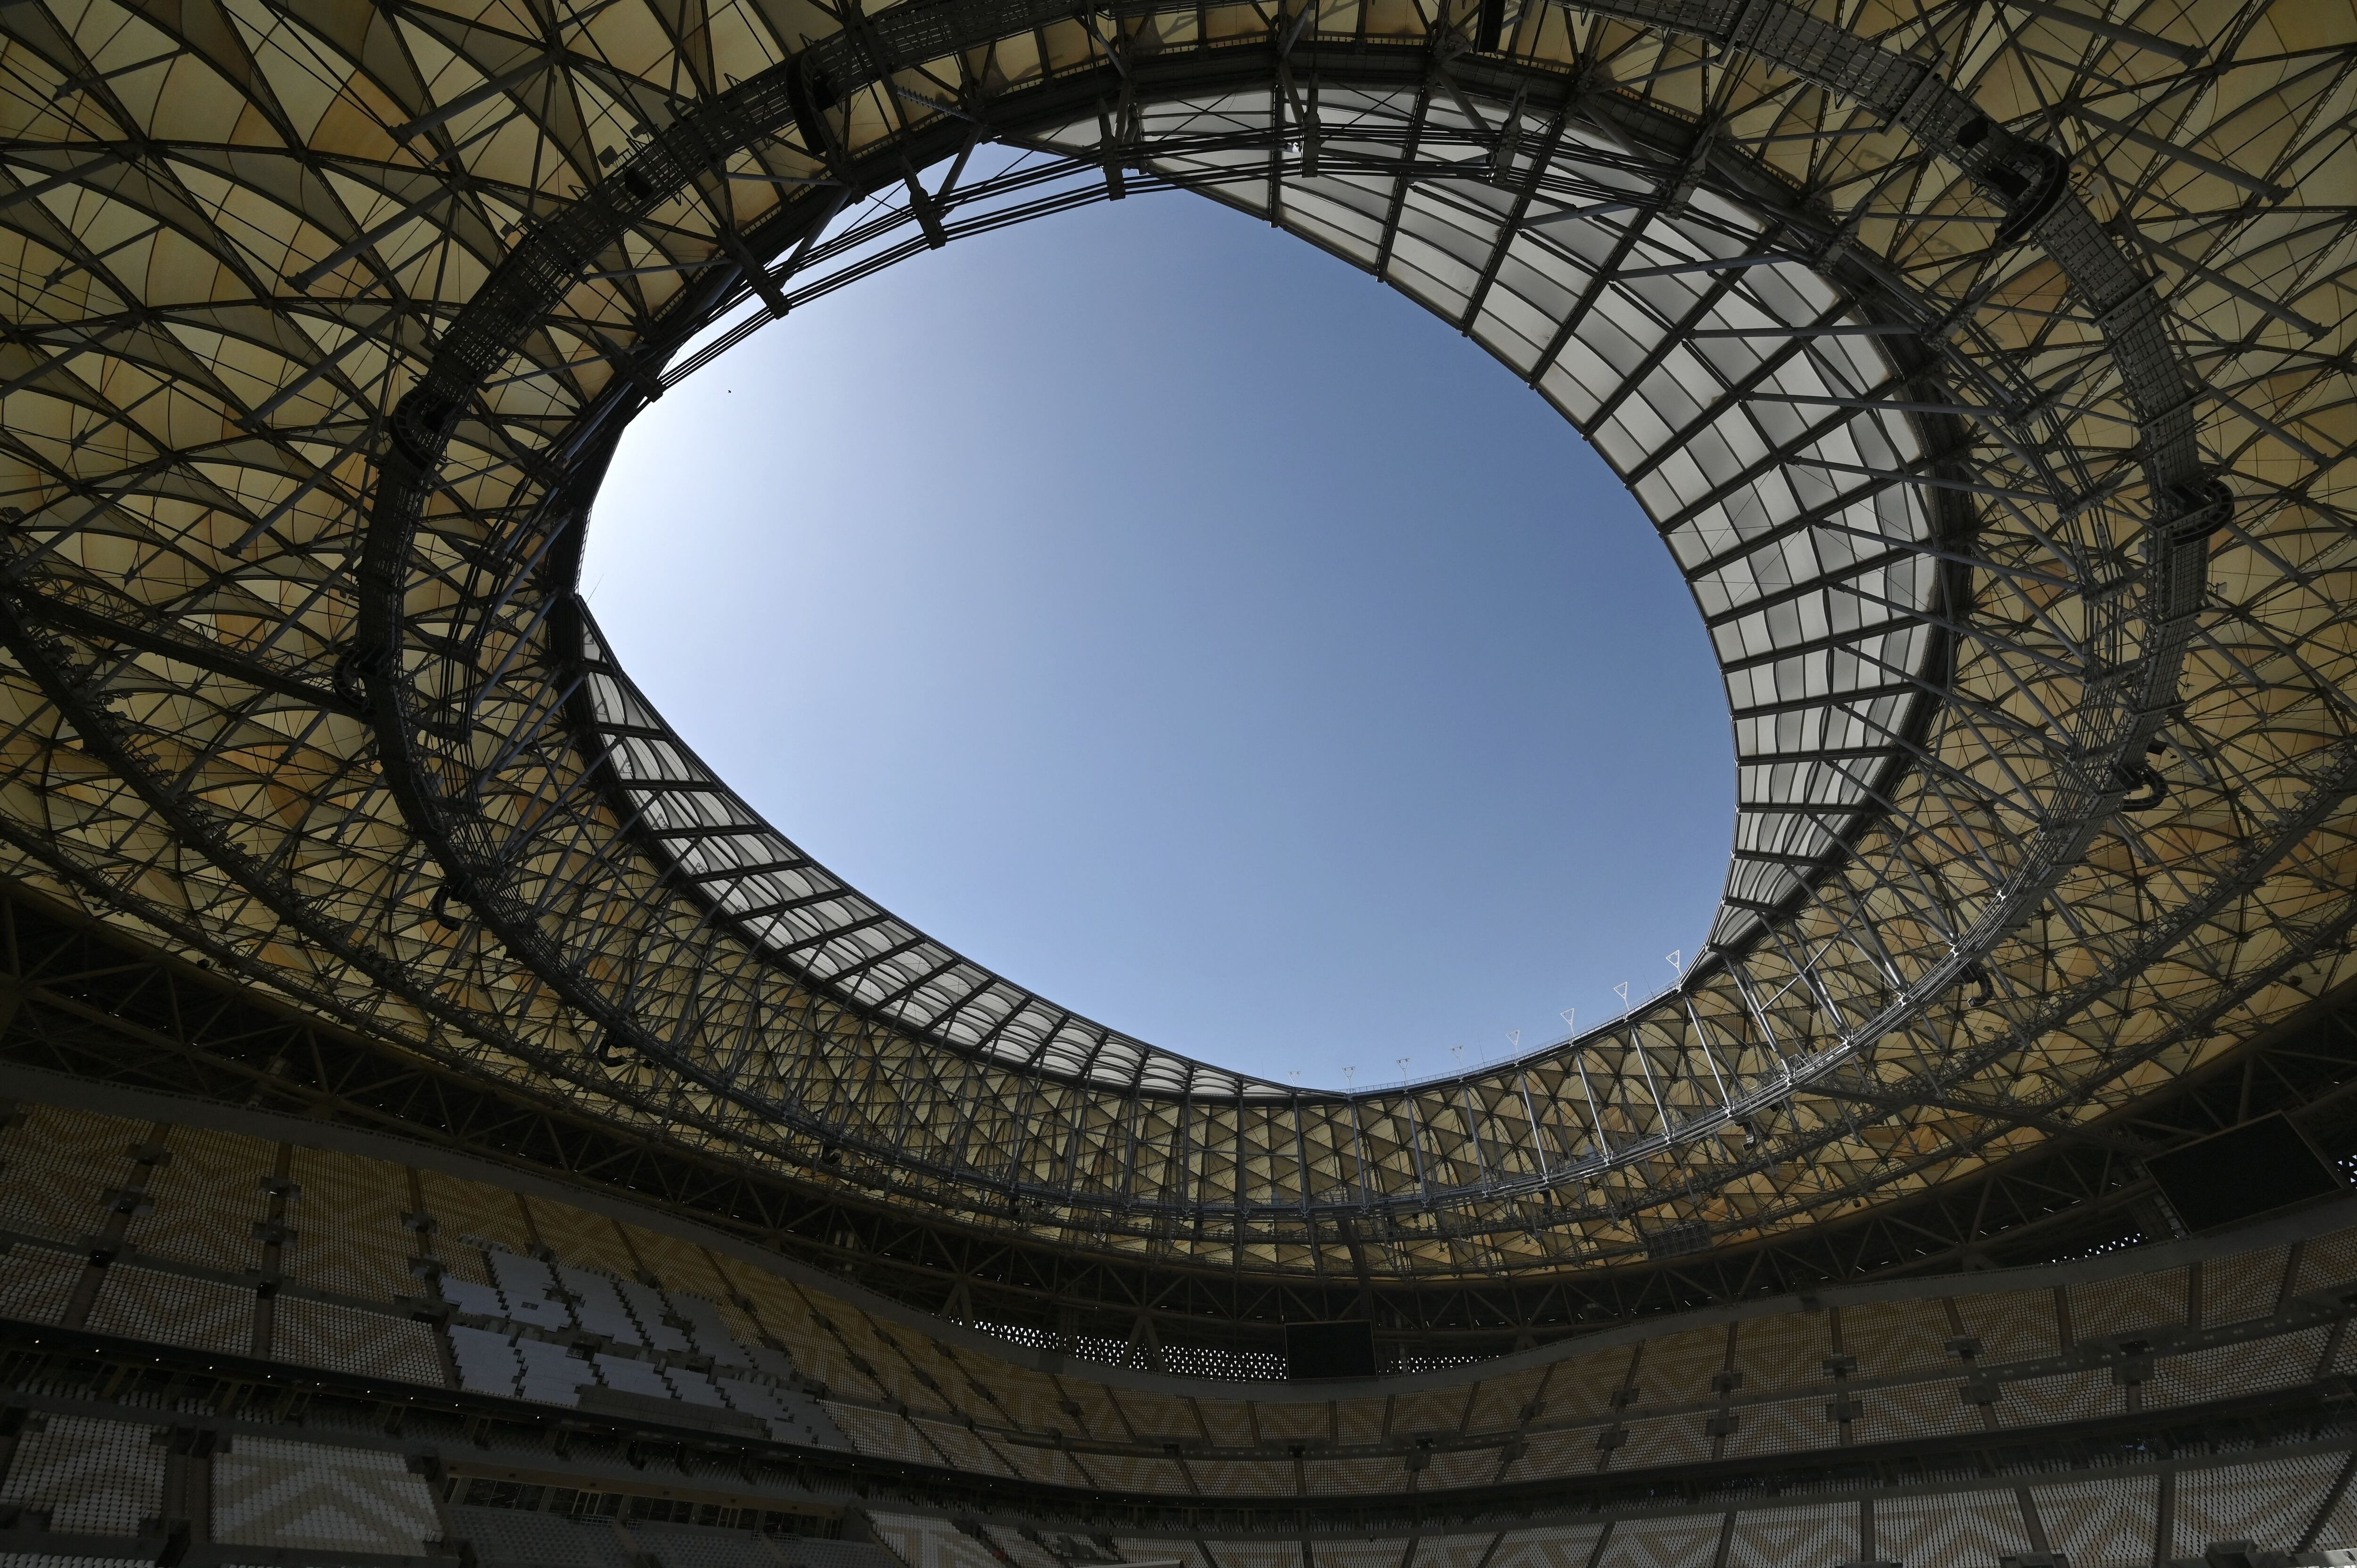 The shadows generated by the roof of the Lusail stadium for the Qatar 2022 World Cup.